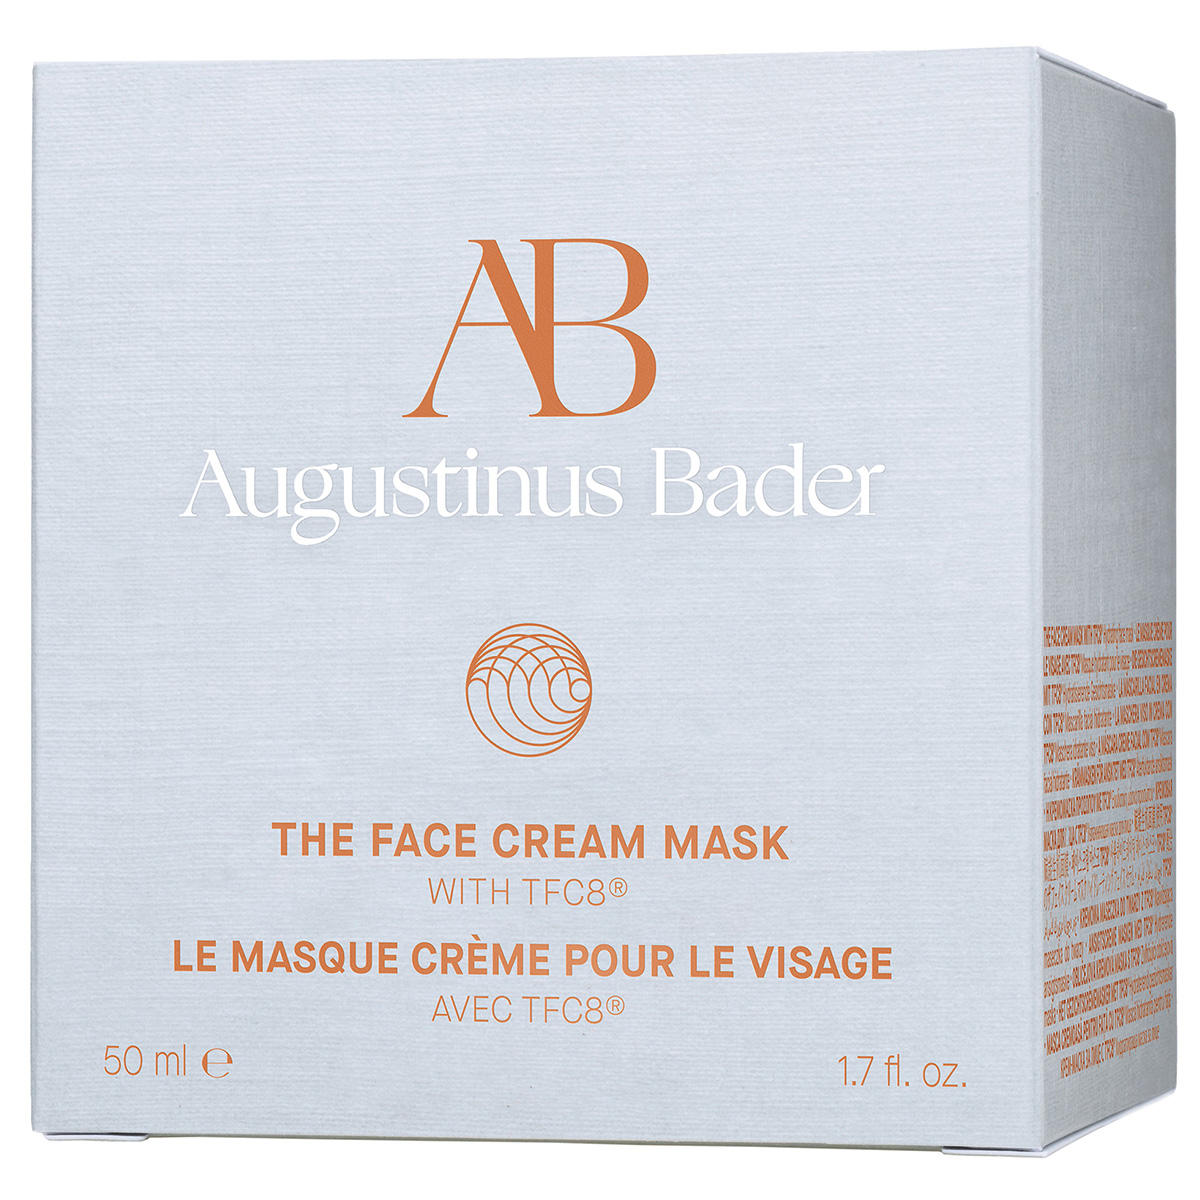 Augustinus Bader The Face Cream Mask 50 ml - 4